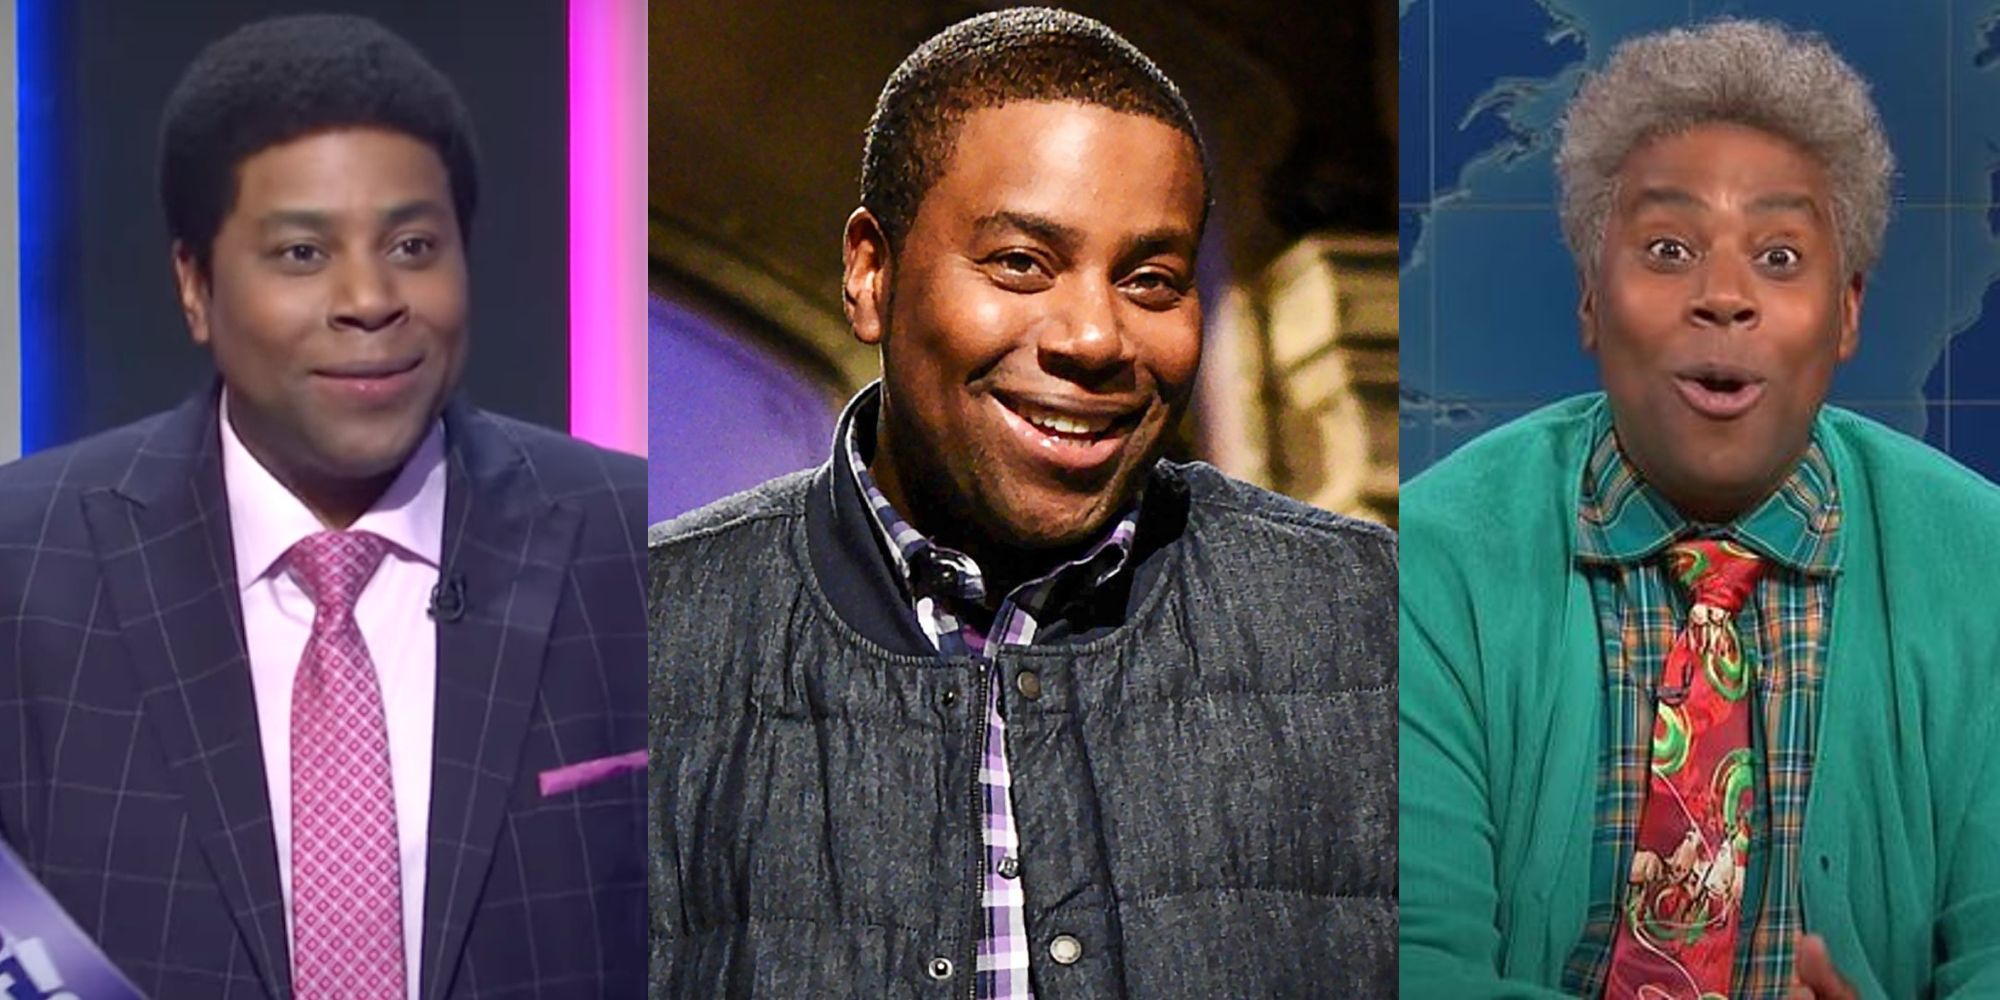 Kenan as a game show host; Kenan standing on the main stage at SNL; Kenan as Willie on Weekend Update